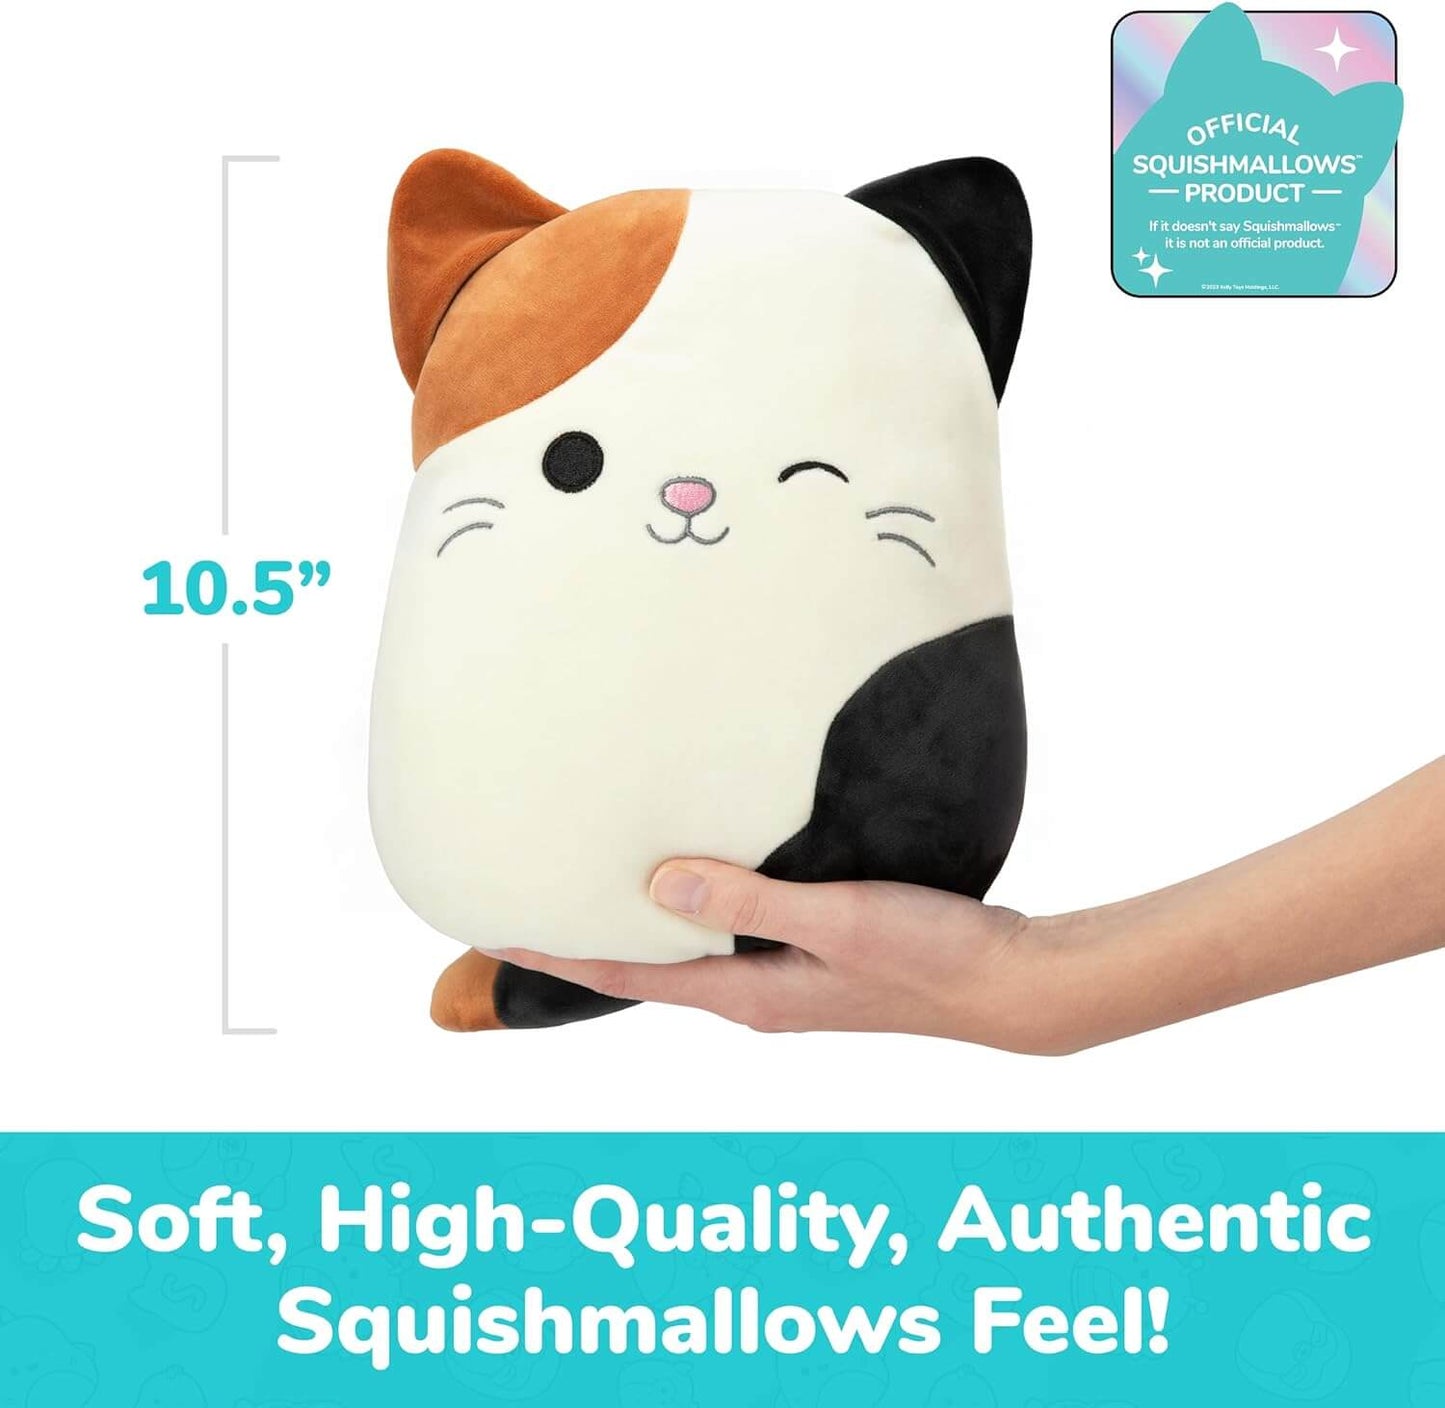 Squishmallows Cameron Lavender Scented Heating Pad